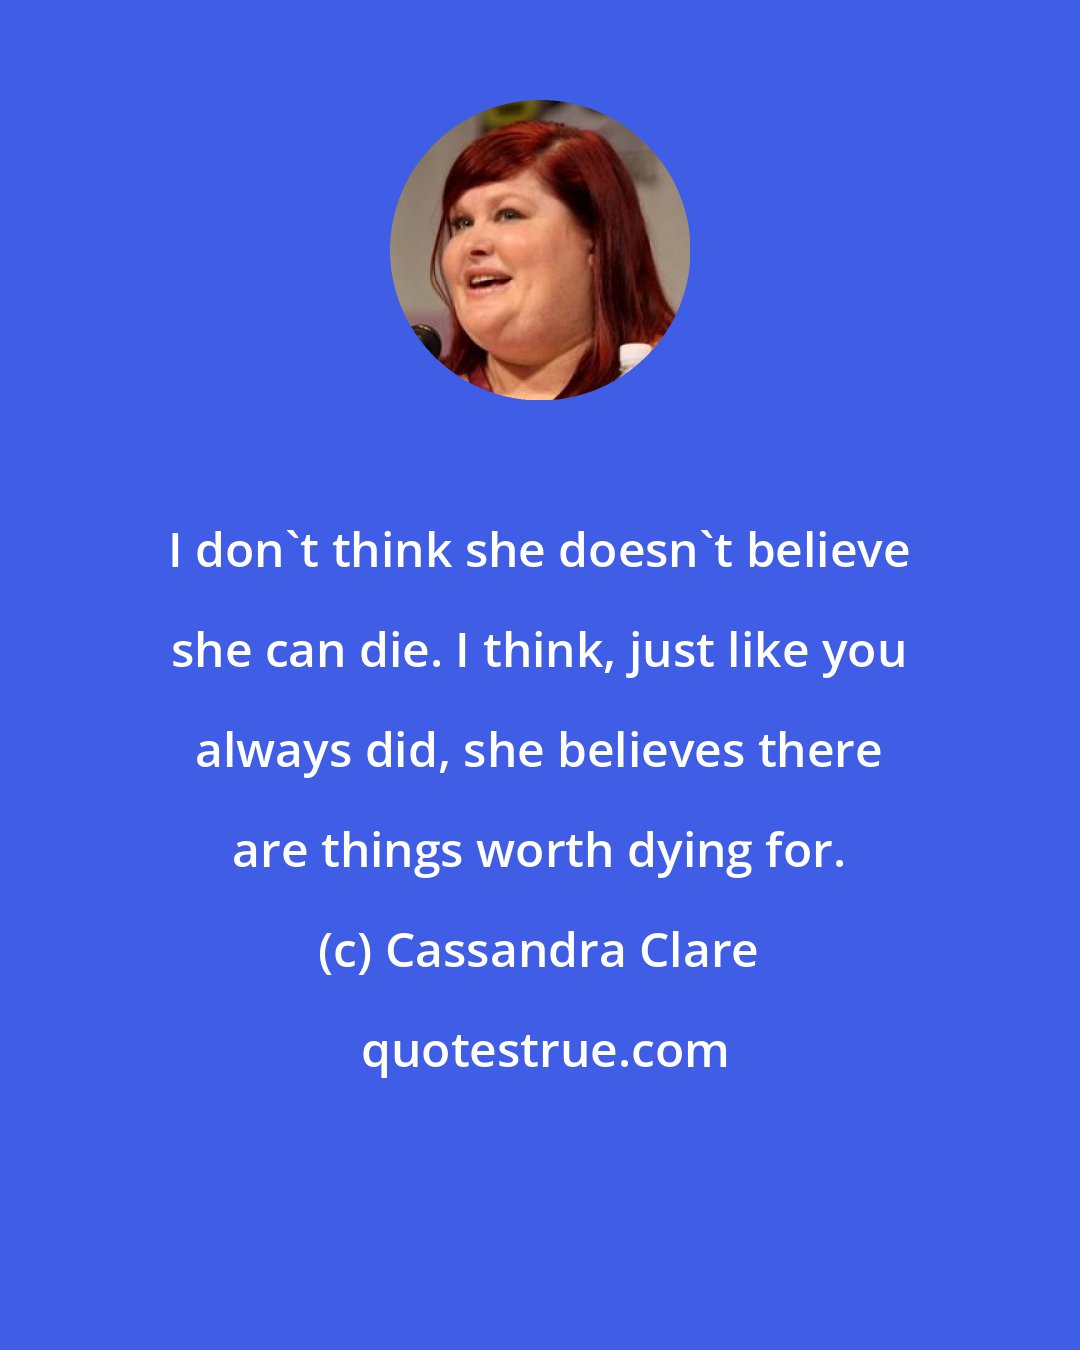 Cassandra Clare: I don't think she doesn't believe she can die. I think, just like you always did, she believes there are things worth dying for.